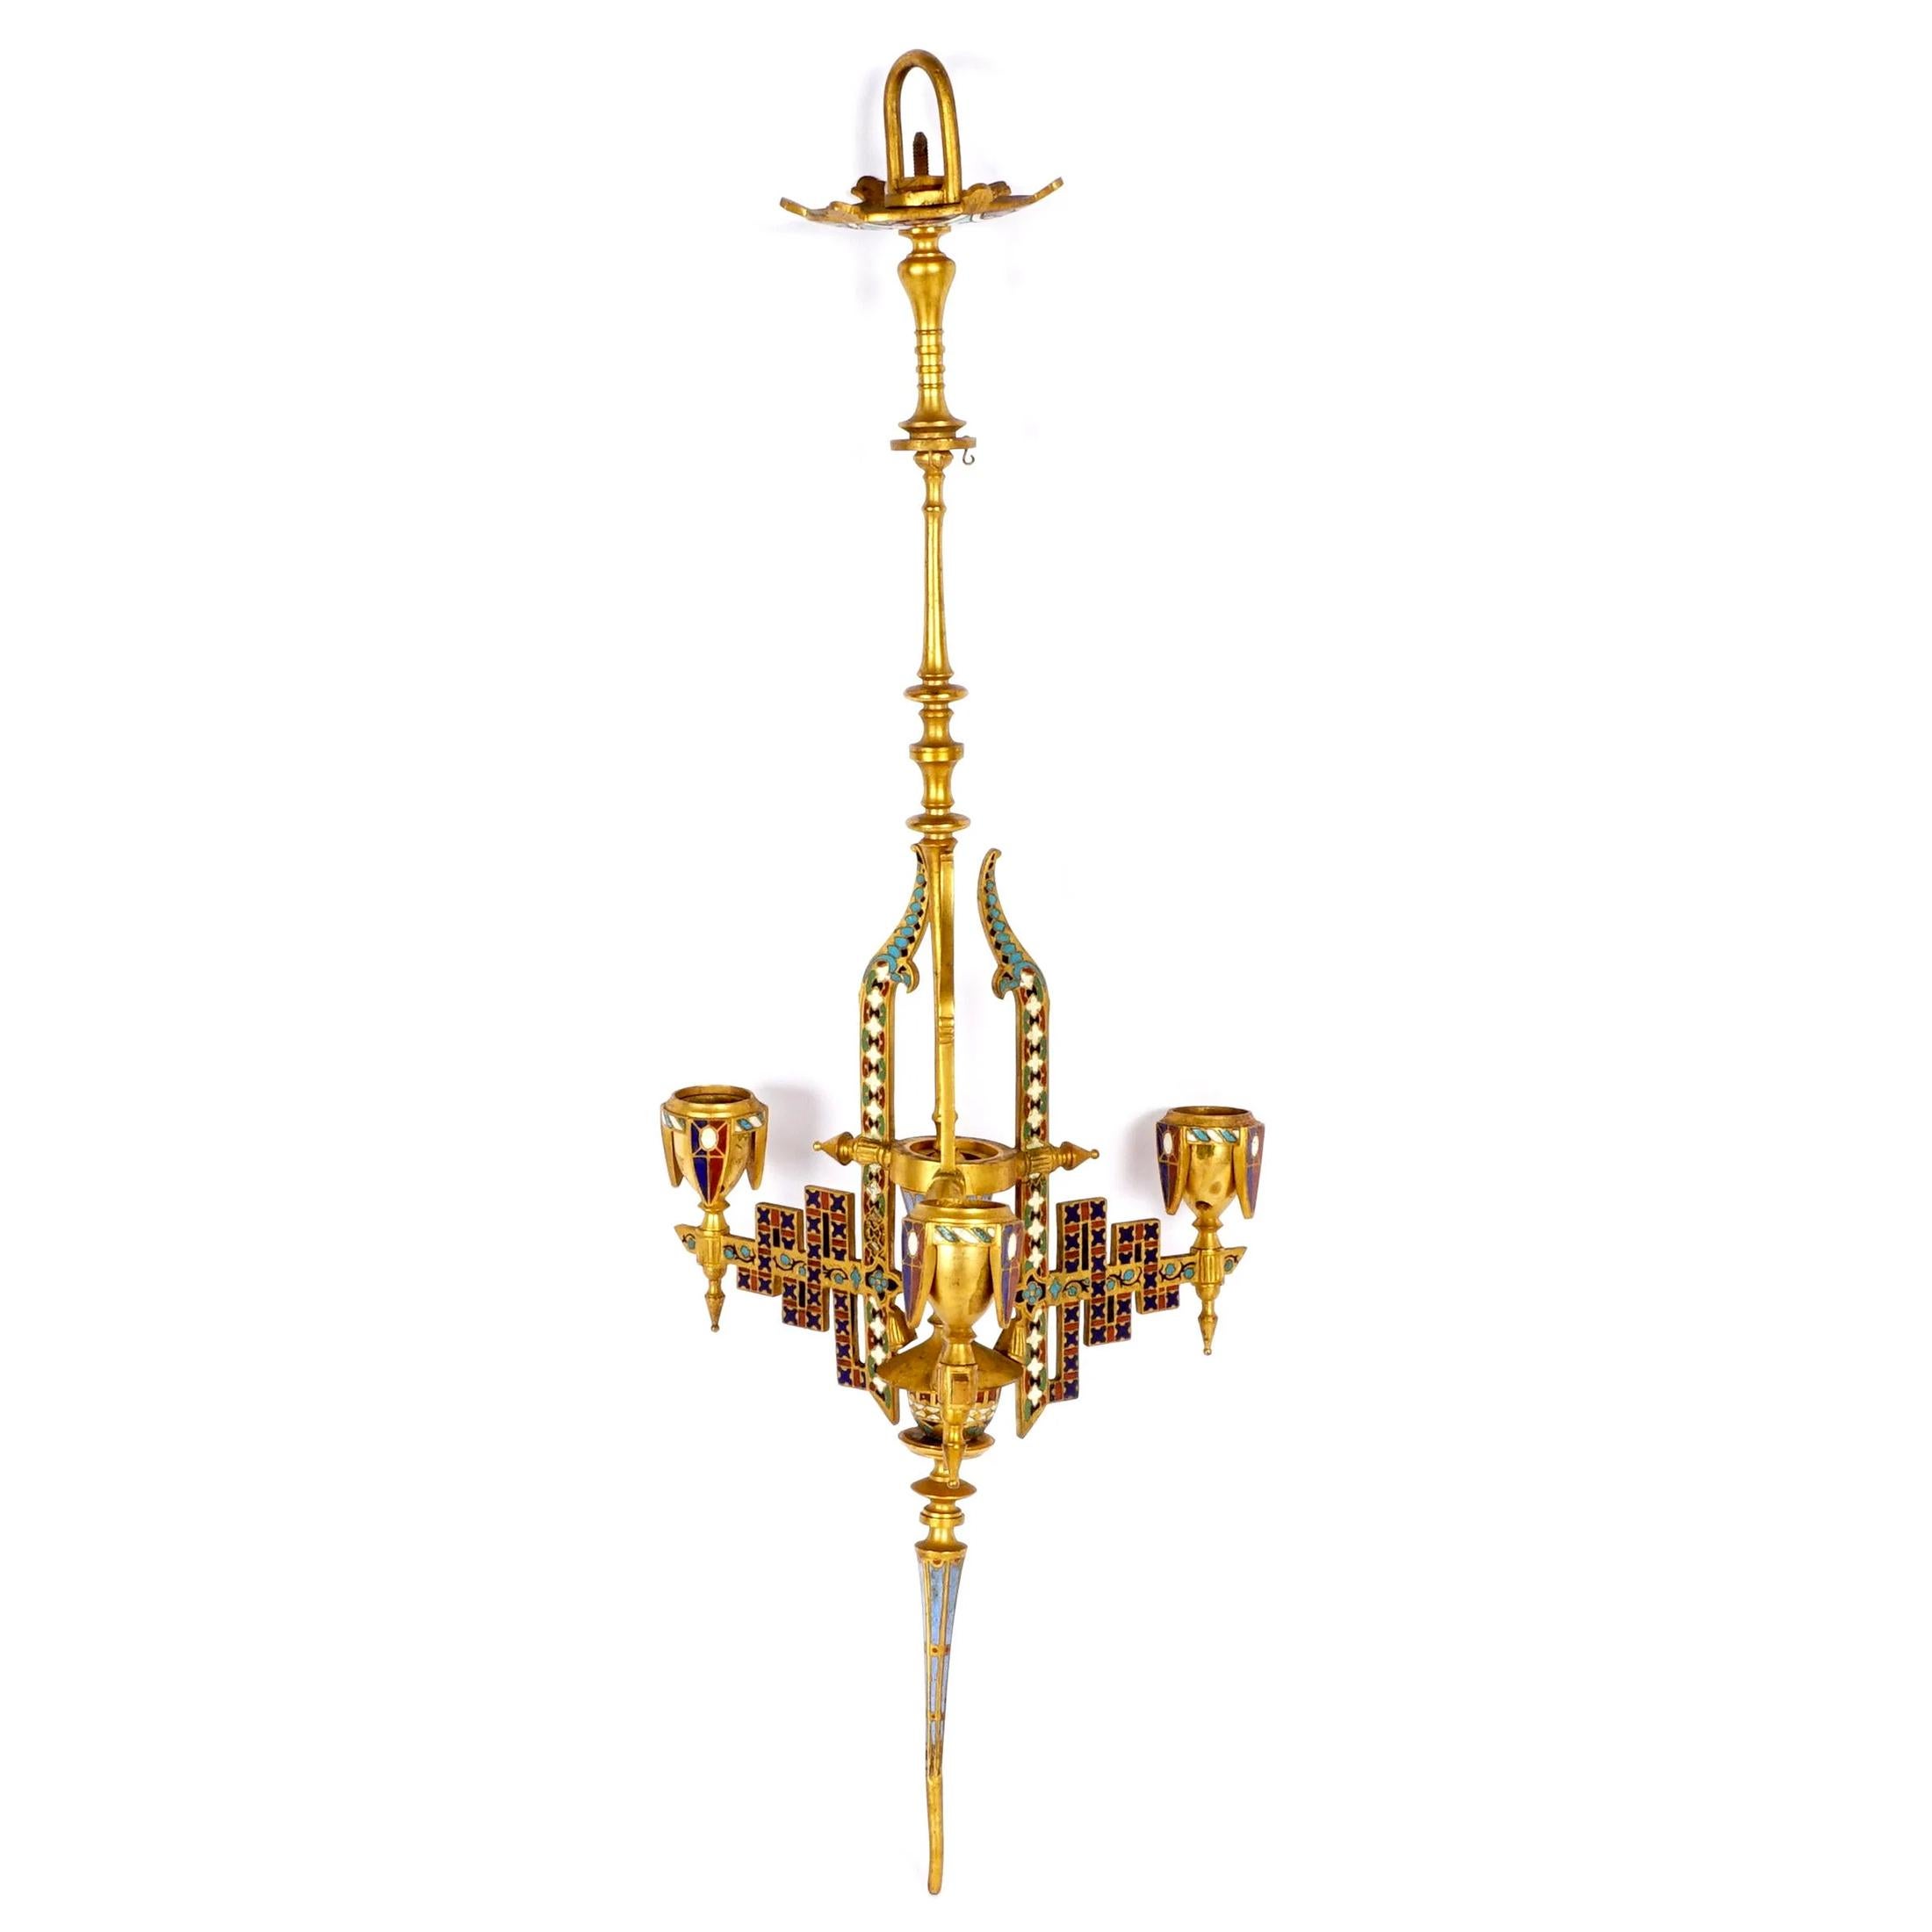 Fine quality Bronze champlevé decorated three light chandelier

Date: 19th century
Origin: French
Dimension: 23 3/4 in. x 7 in.